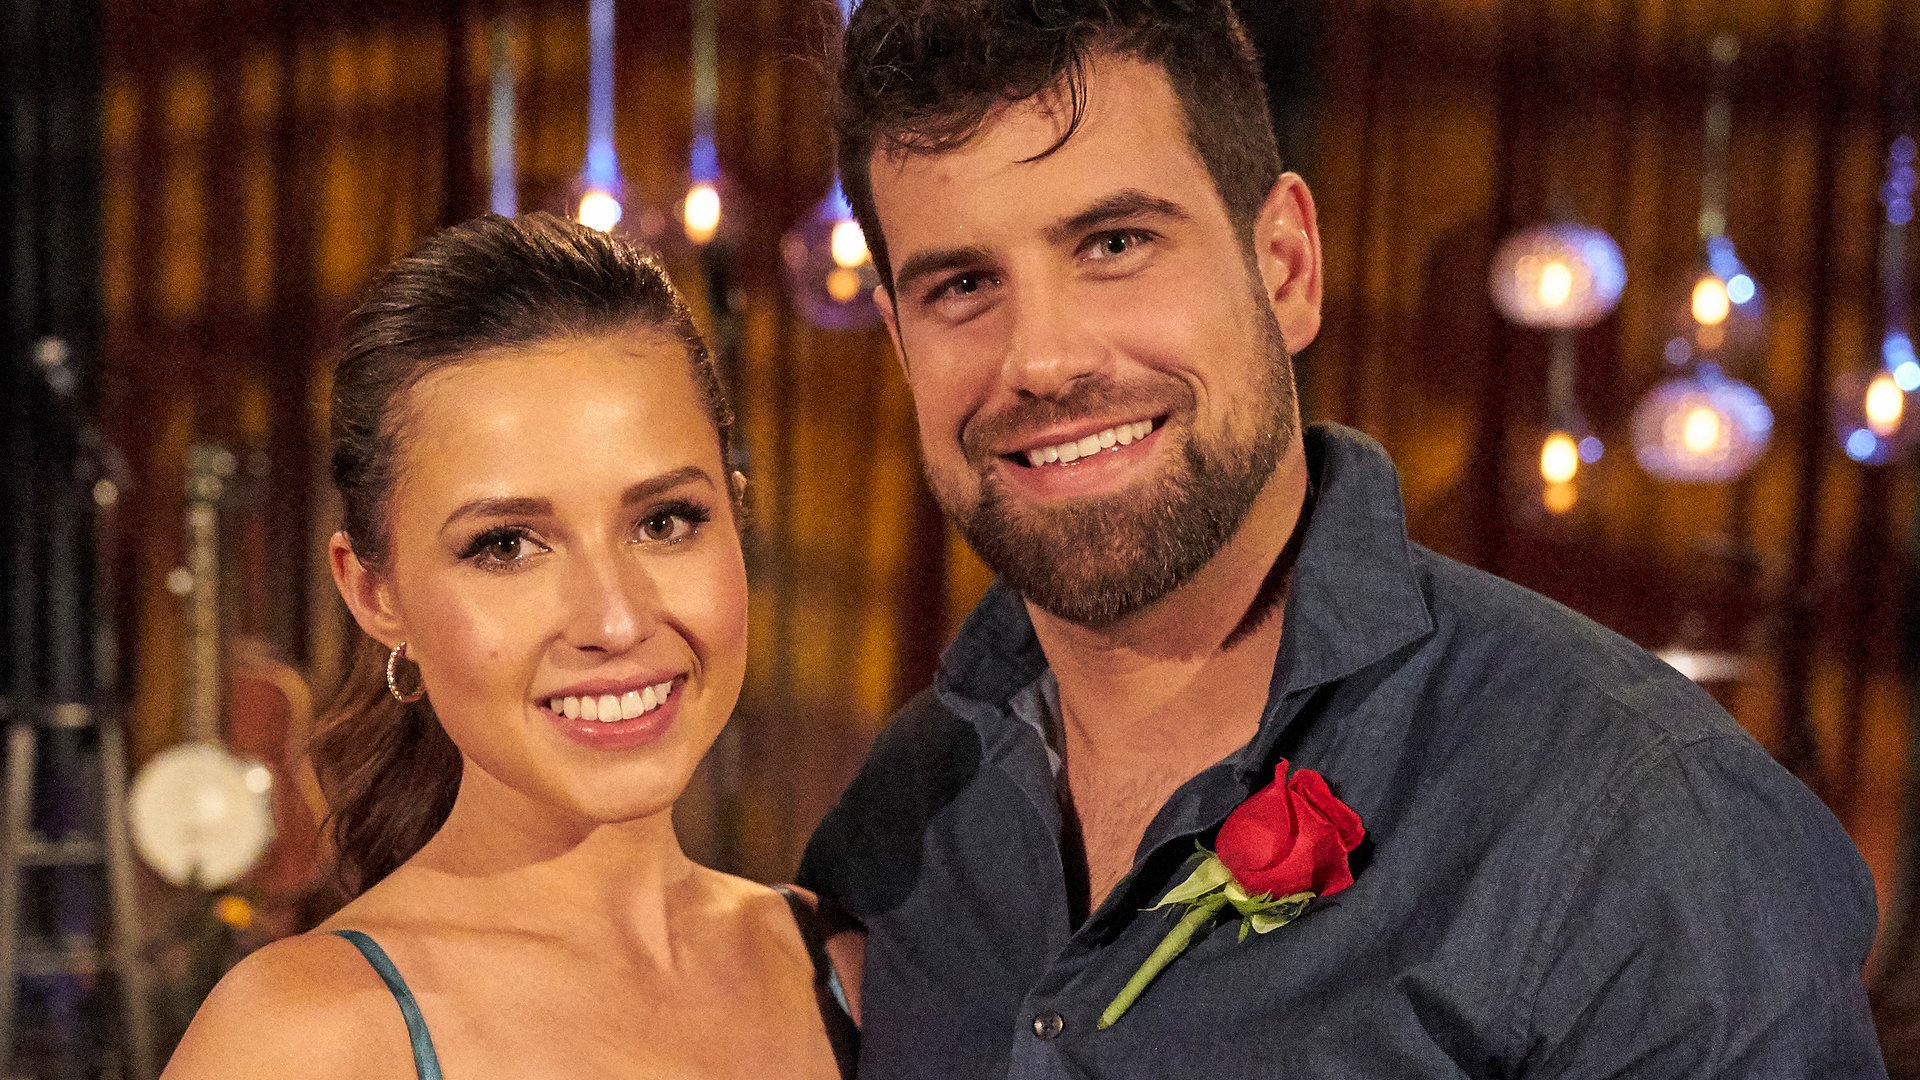 Katie Thurston and Blake Moynes in ‘The Bachelorette’ Season 17 Week 5 one-on-one date